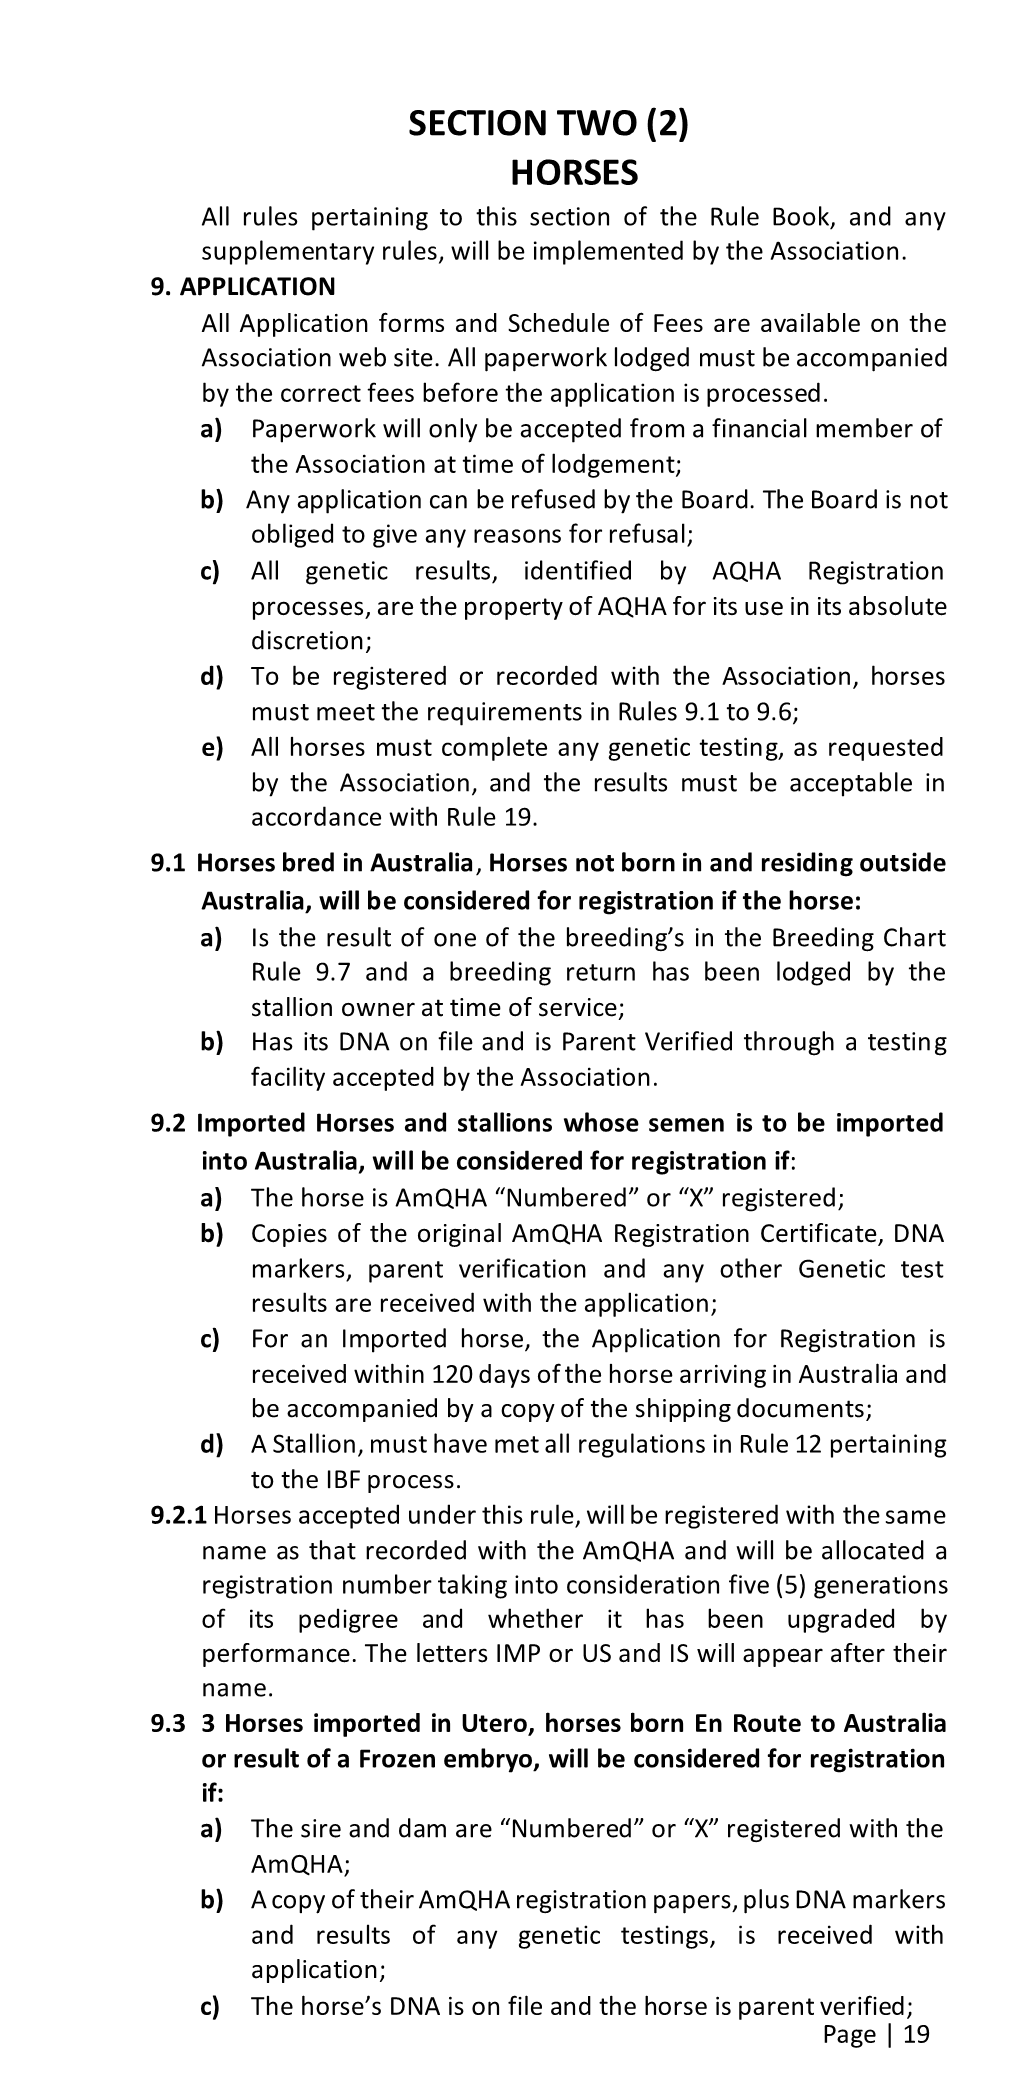 SECTION TWO (2) HORSES All Rules Pertaining to This Section of the Rule Book, and Any Supplementary Rules, Will Be Implemented by the Association